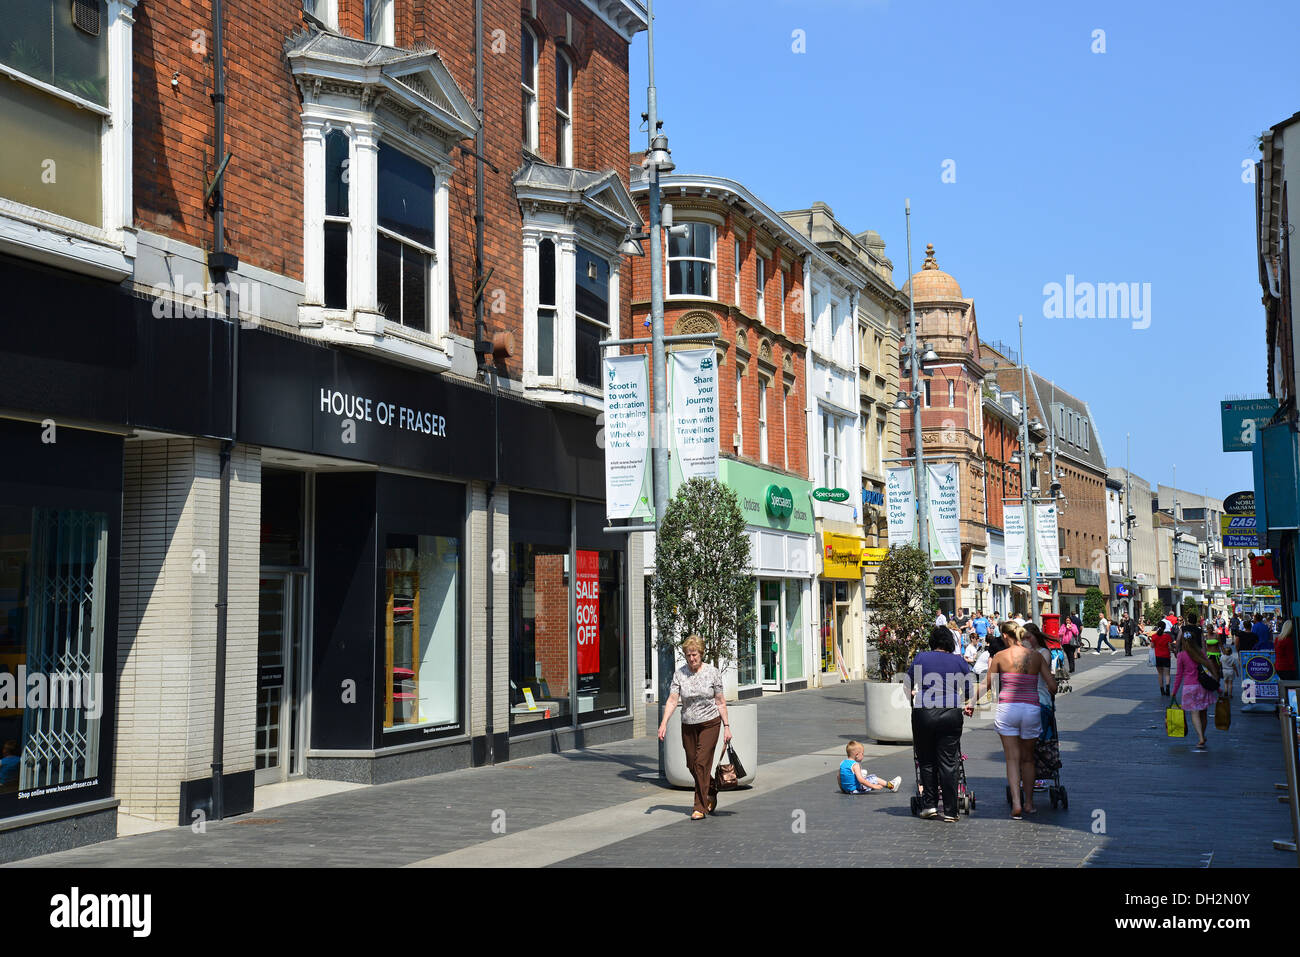 Victoria Street, Grimsby, Lincolnshire, Angleterre, Royaume-Uni Banque D'Images